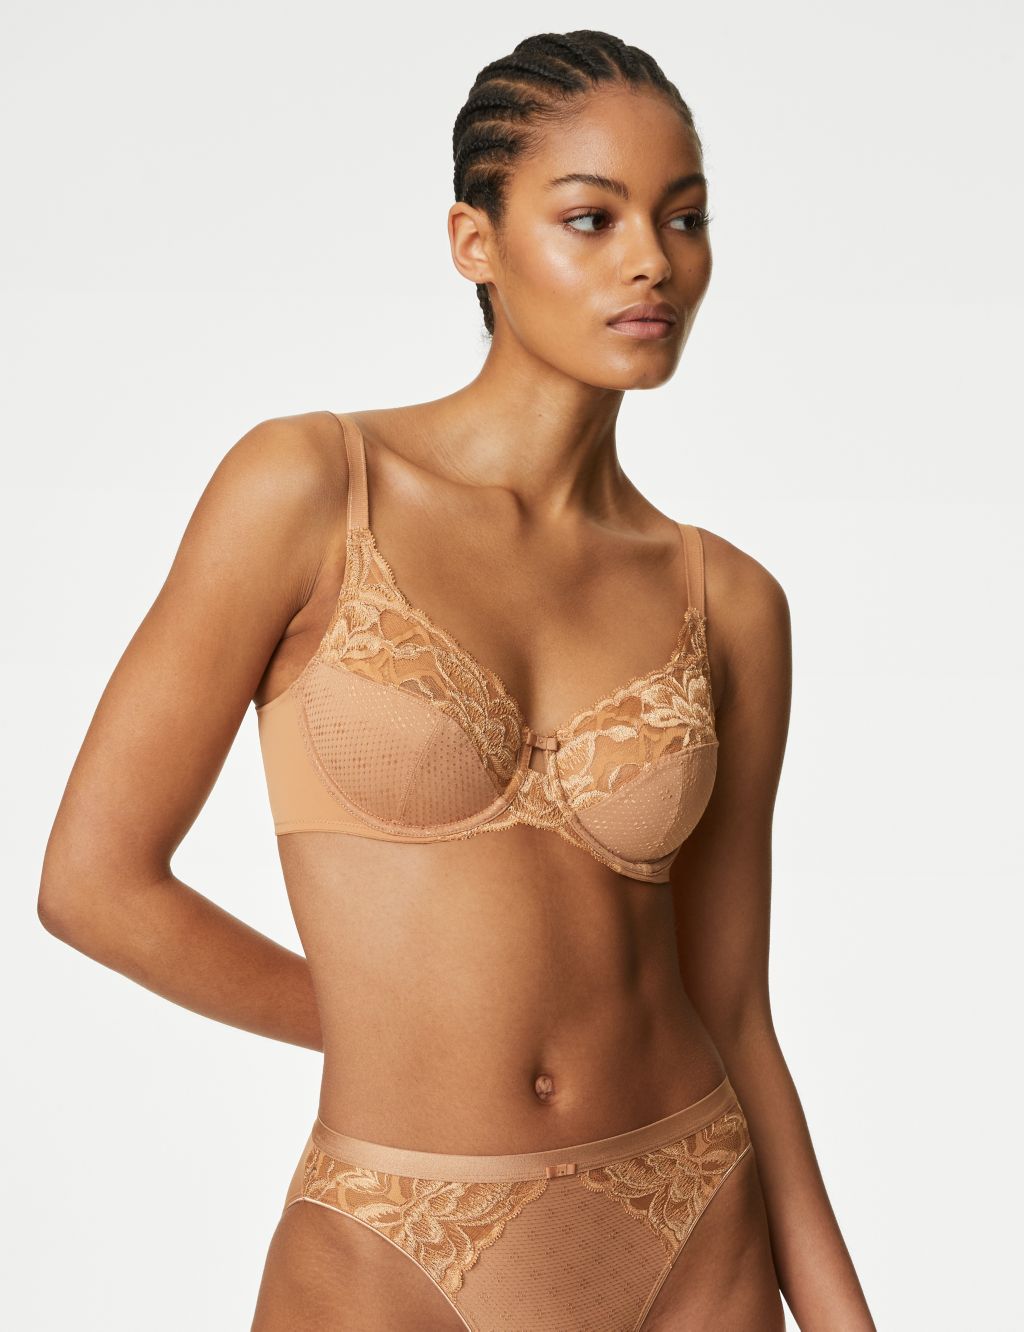 Wildblooms Wired Full Cup Bra A-E image 1